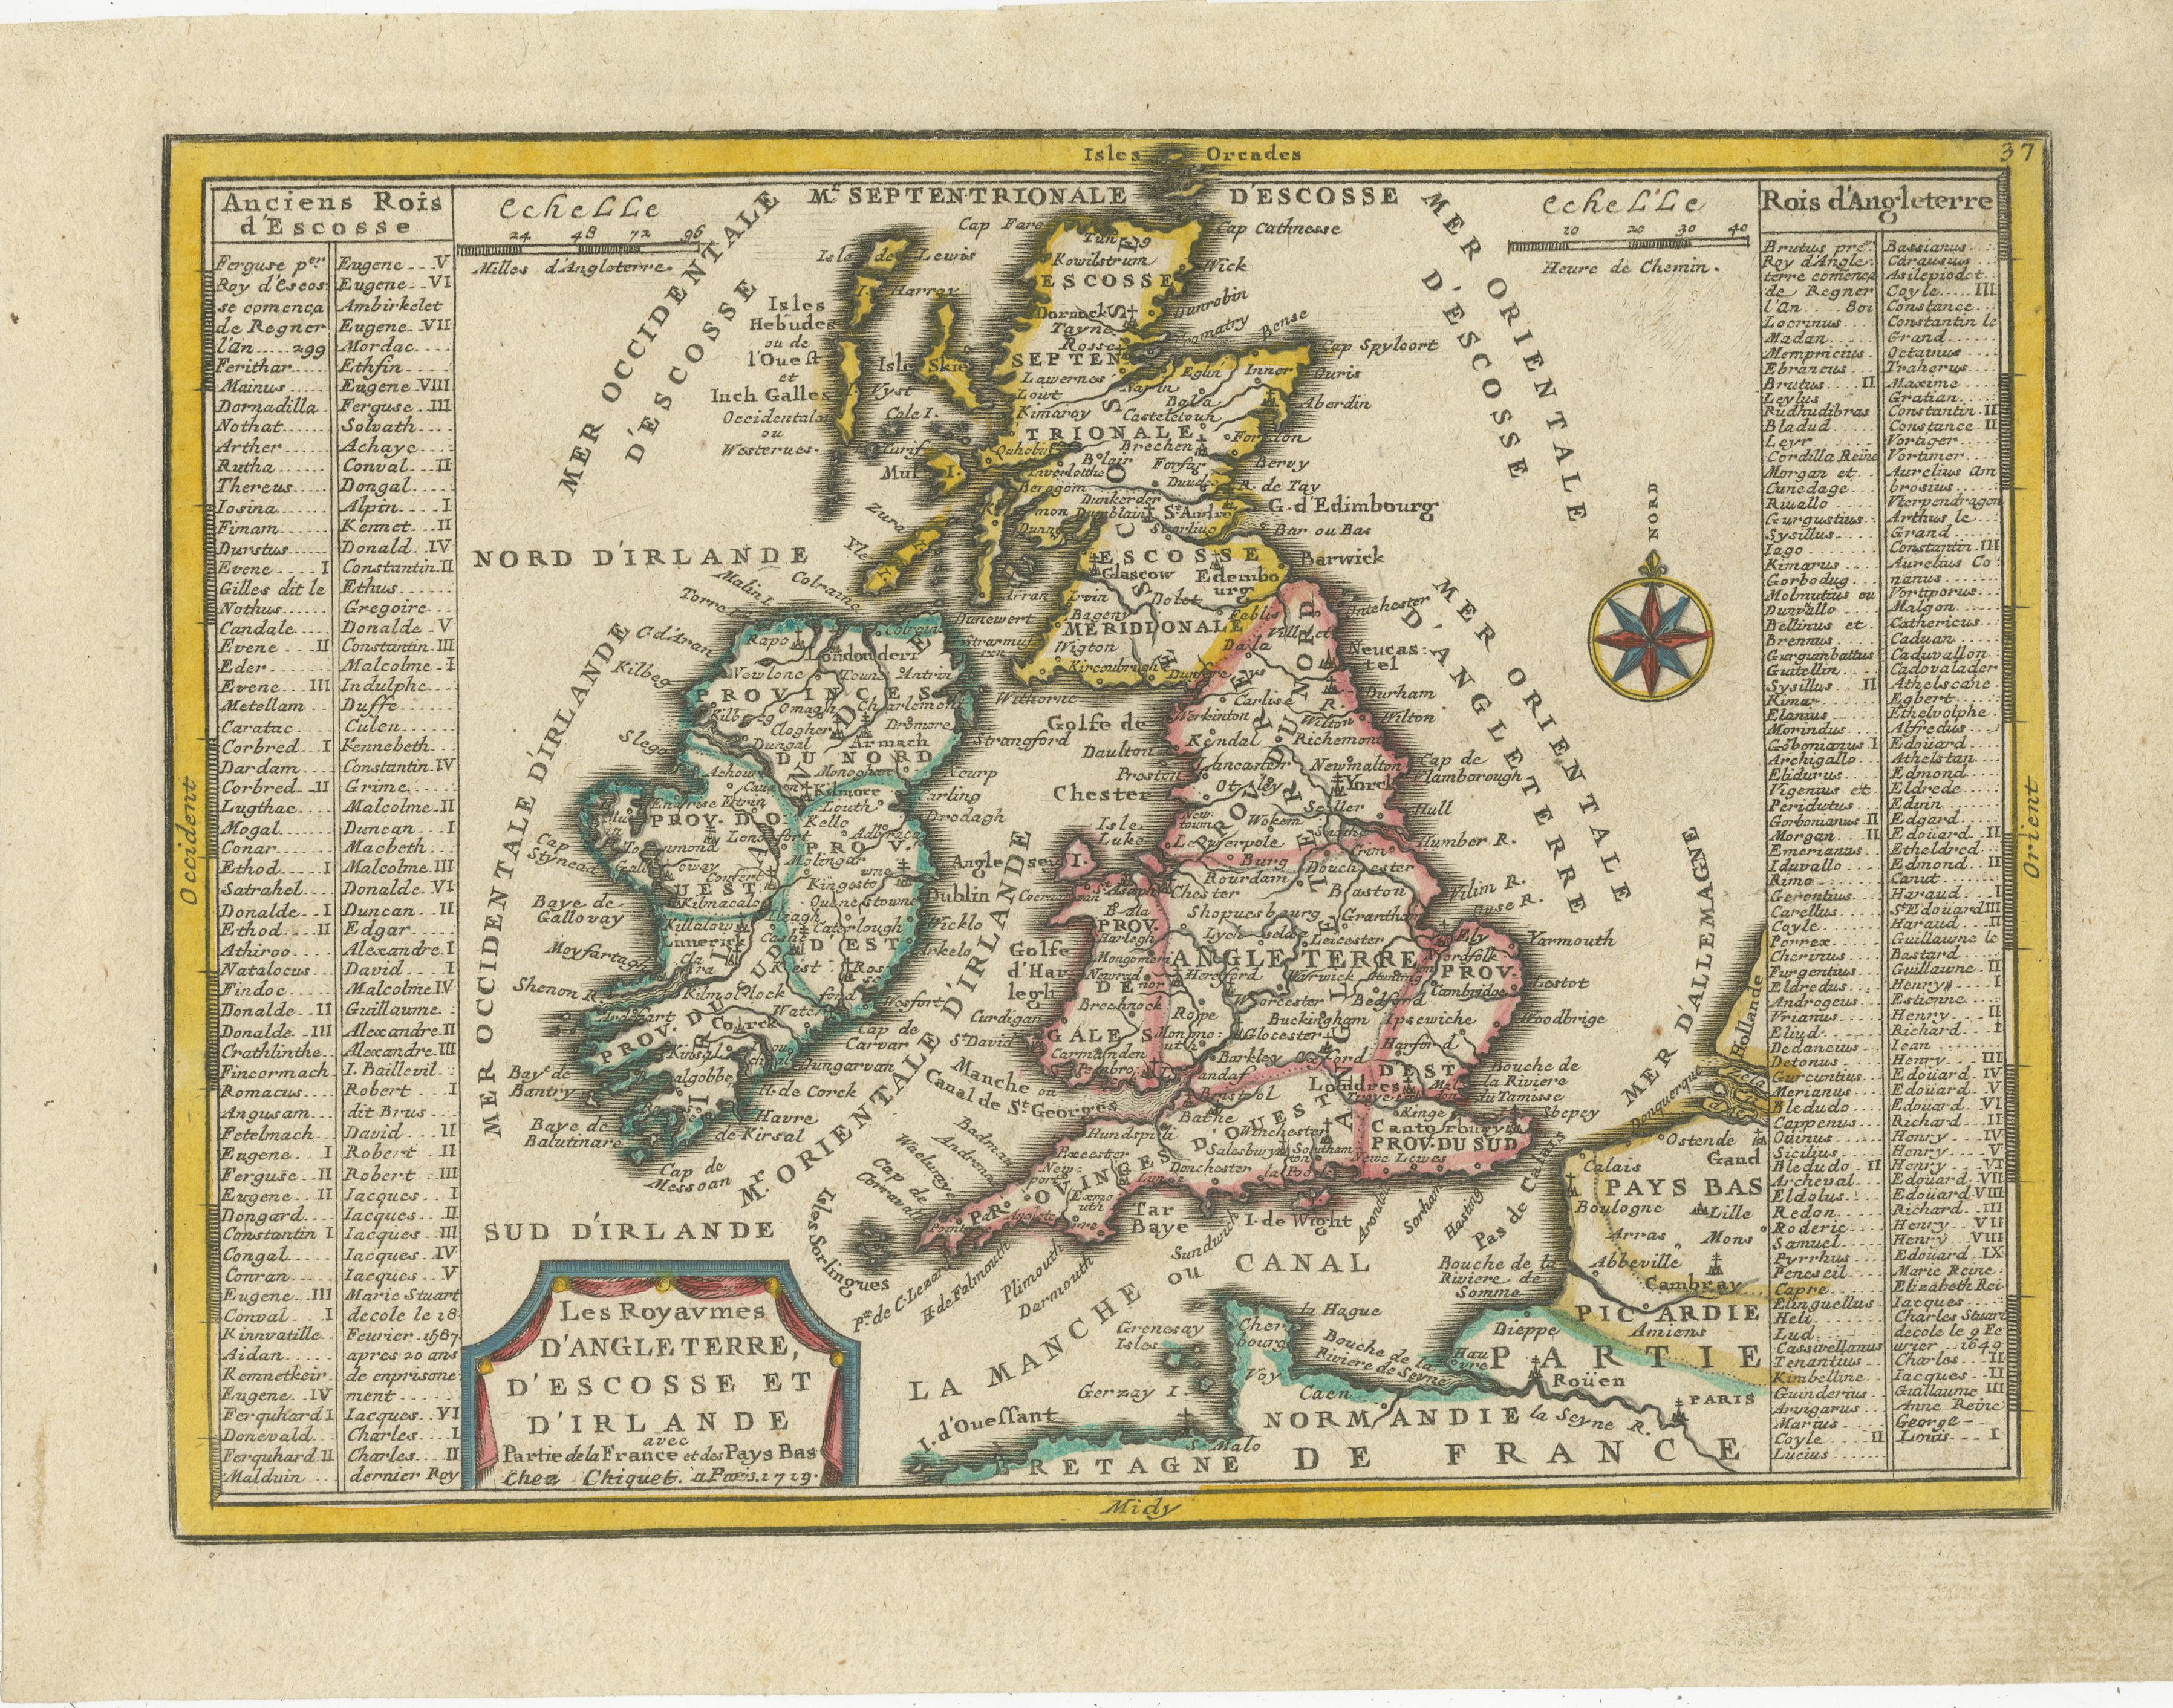 Antique map titled 'Les Royaumes d'Angleterre d'Escosse et d'Irlande (..)'. A lovely, small map of England, Wales, Scotland and Ireland with a portion of the coastline of France and the Netherlands. The map is quite detailed for its small size and